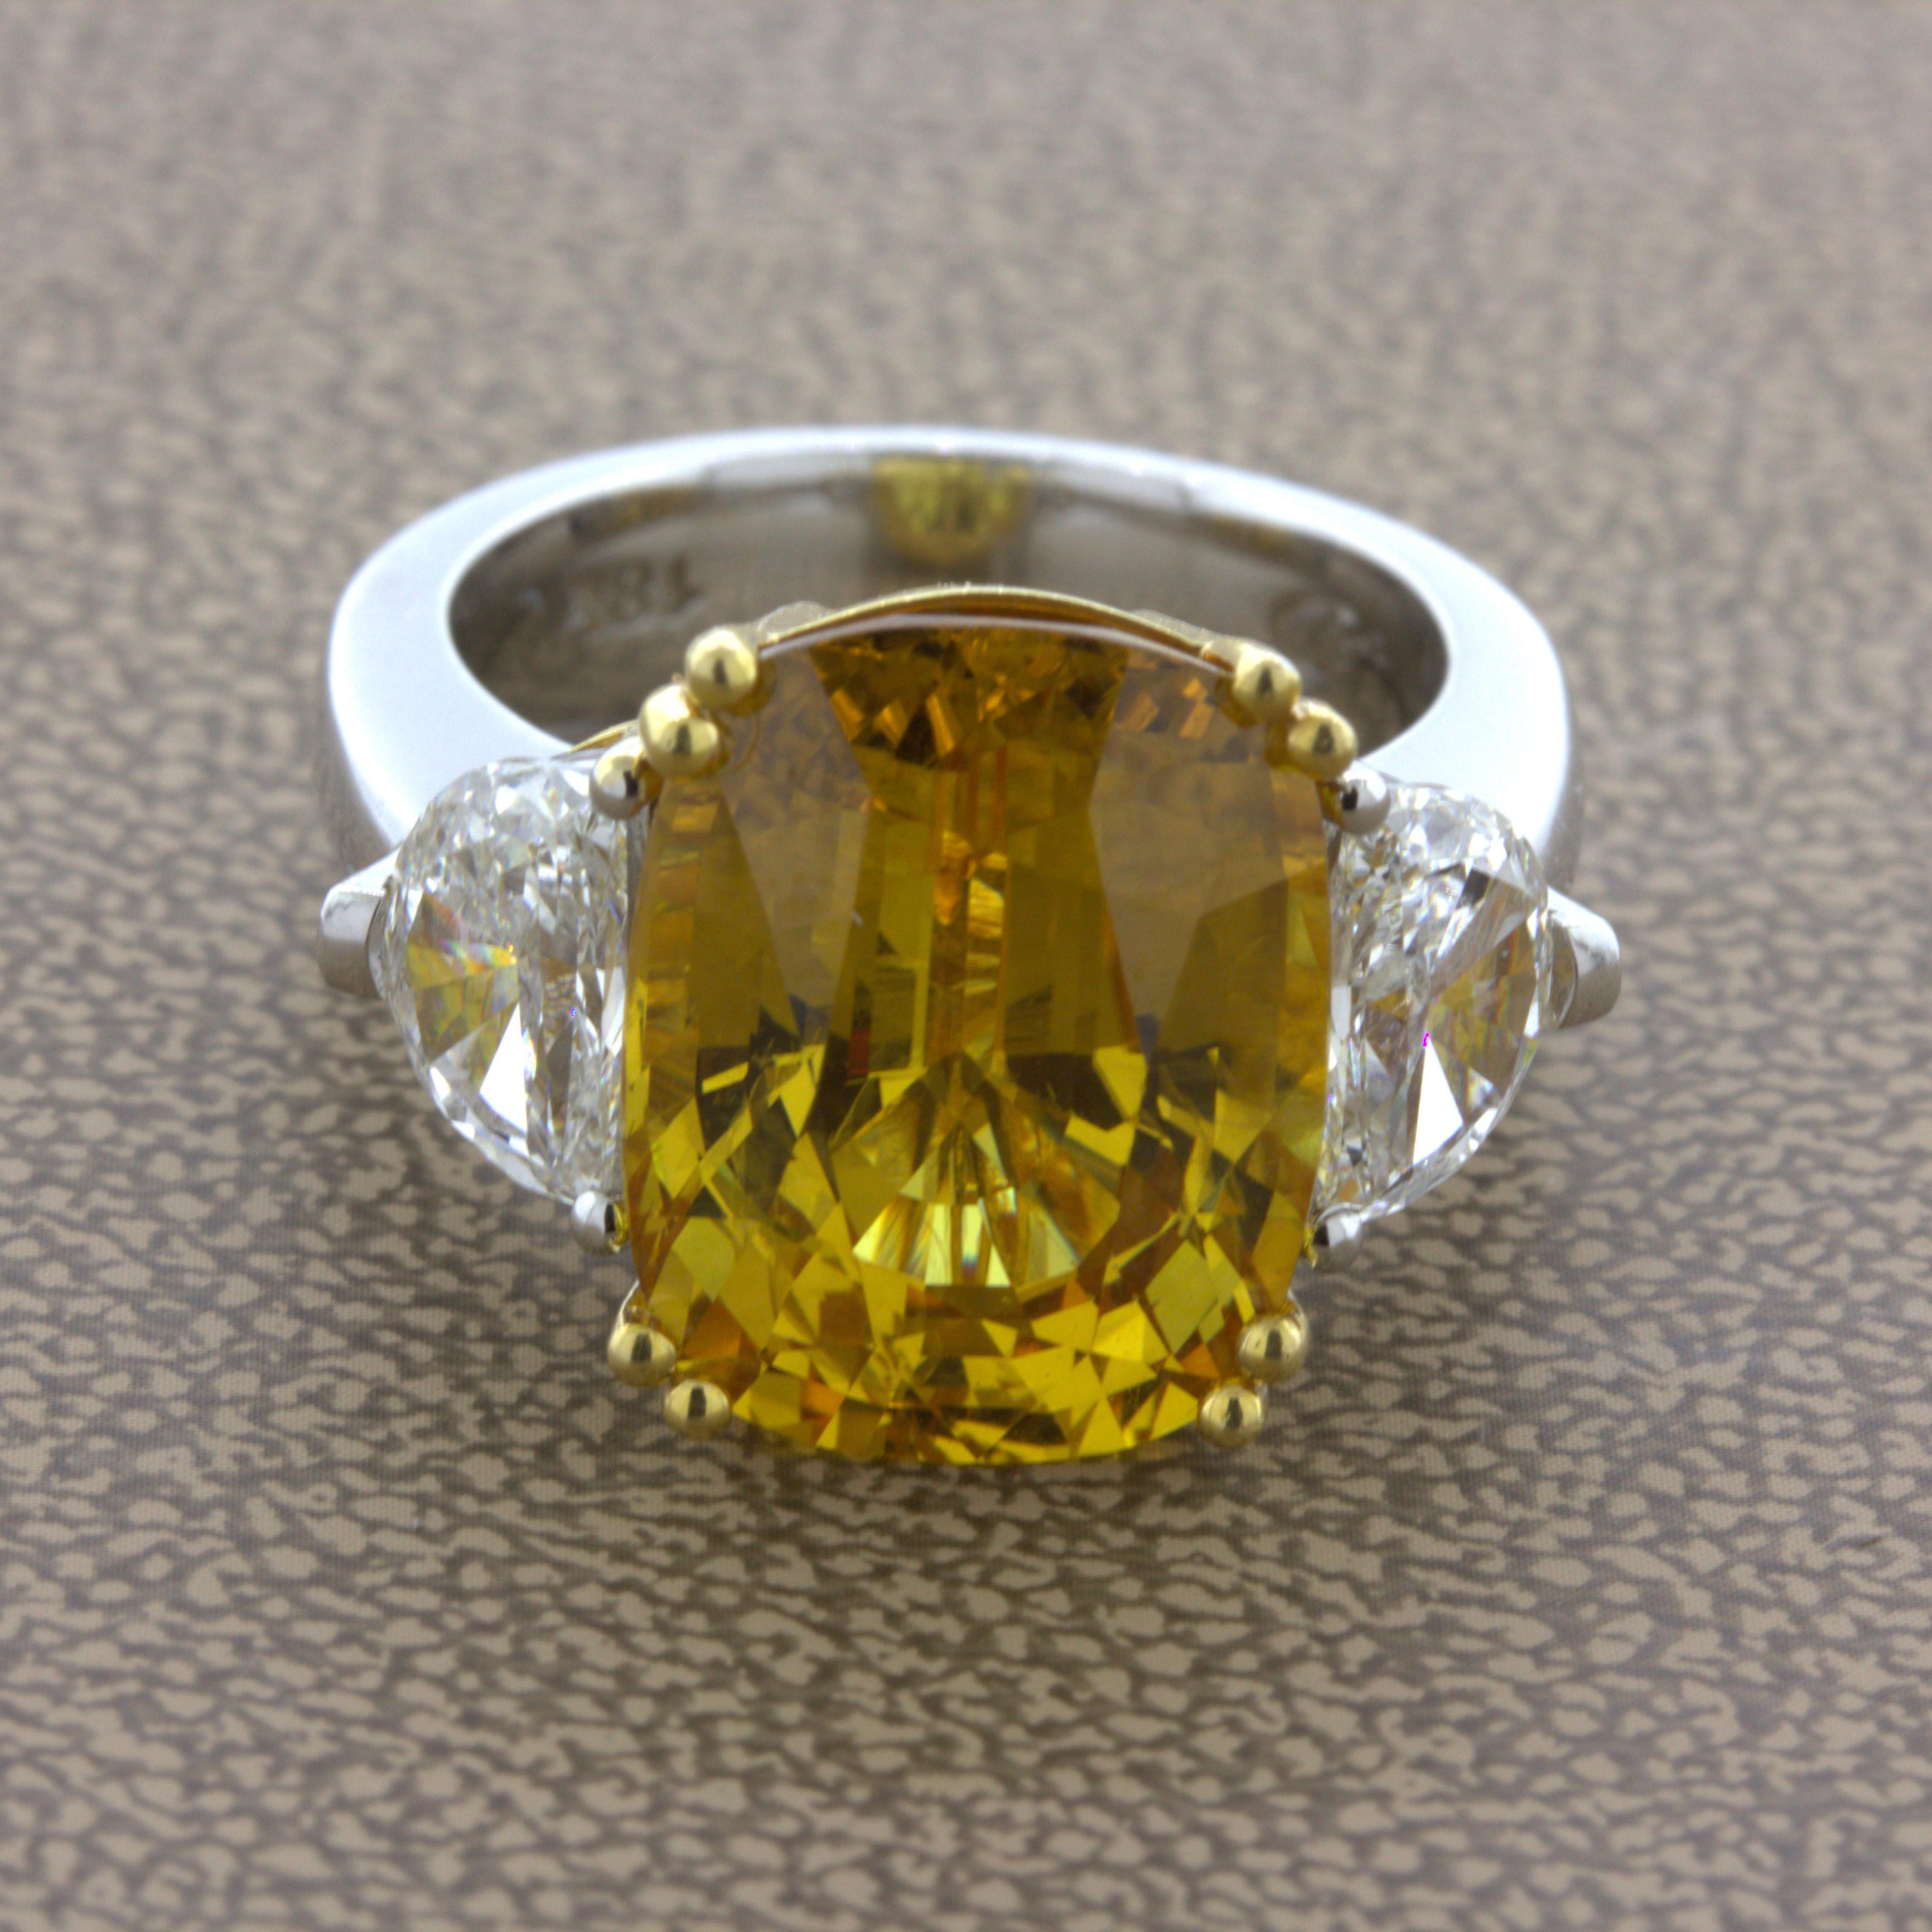 A very special fancy yellow sapphire due to its large size and its amazingly bright and vivid yellow color. It weighs an impressive 12.35 carats and is completely eye clean, no visible inclusions can be seen in the stone. Adding to that, it has a